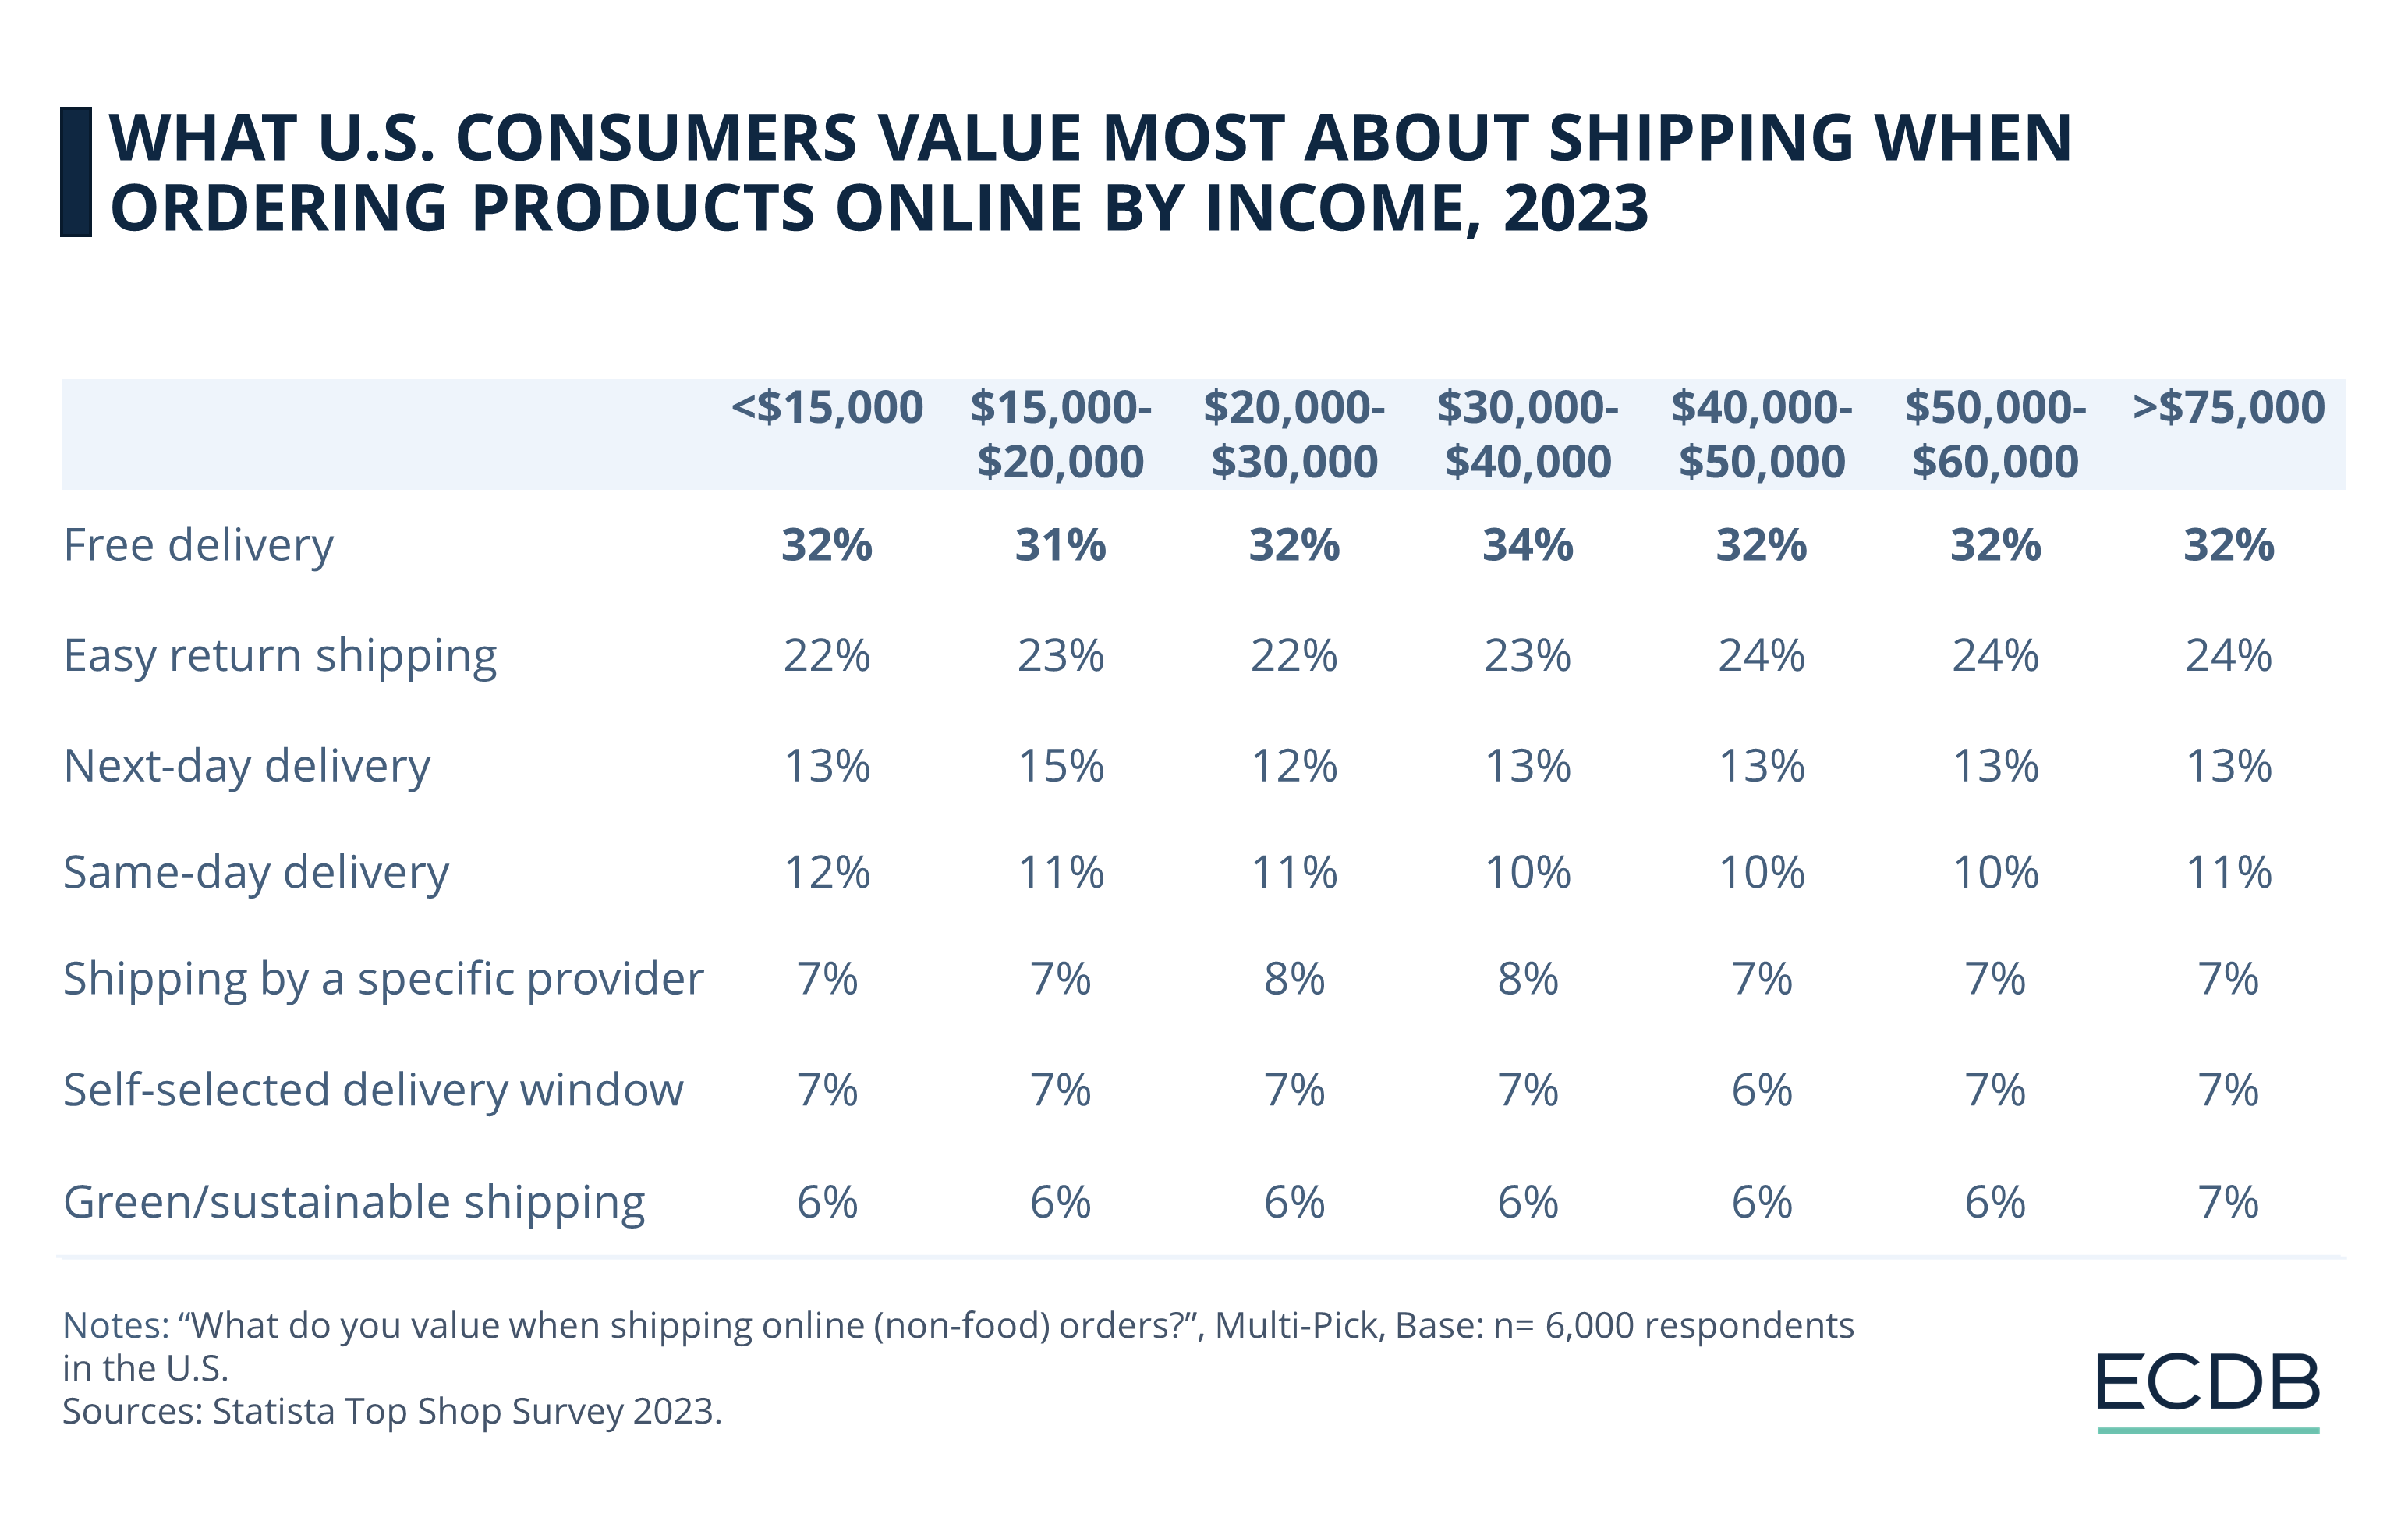 What U.S. Consumers Value About Shipping When Ordering Products Online by Income, 2023